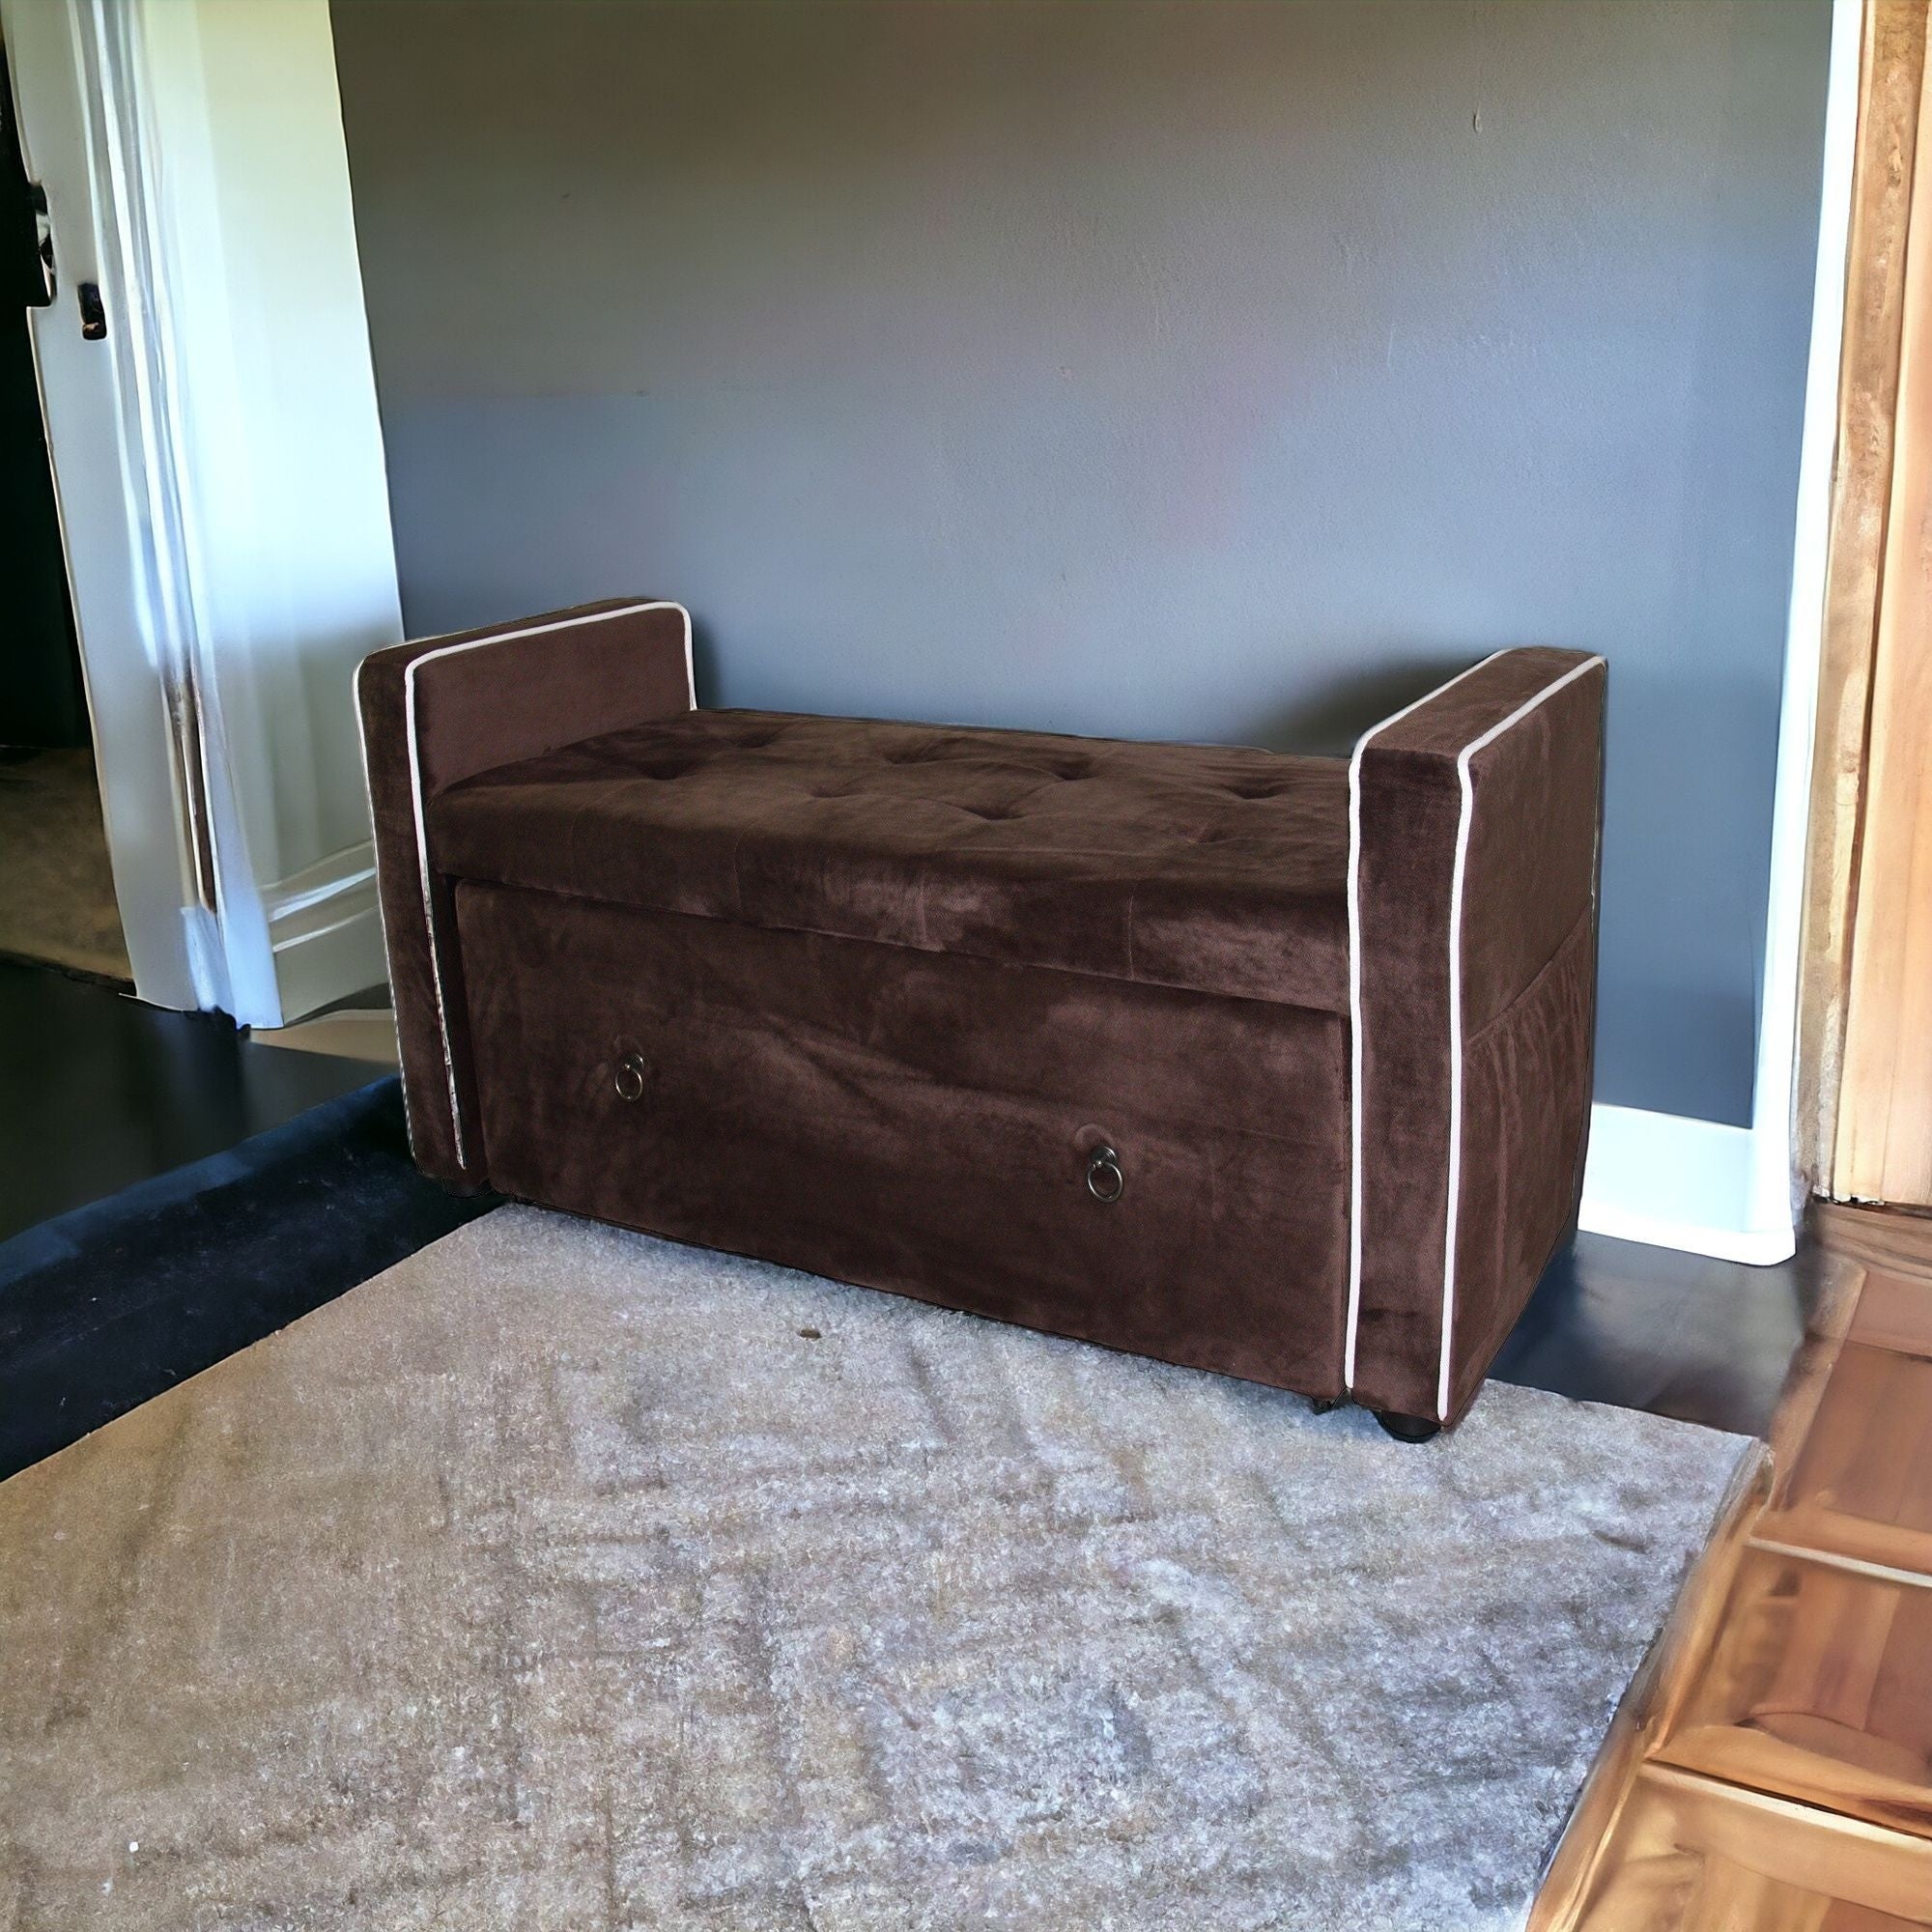 Brown Suede Shoe Storage Bench with Drawer